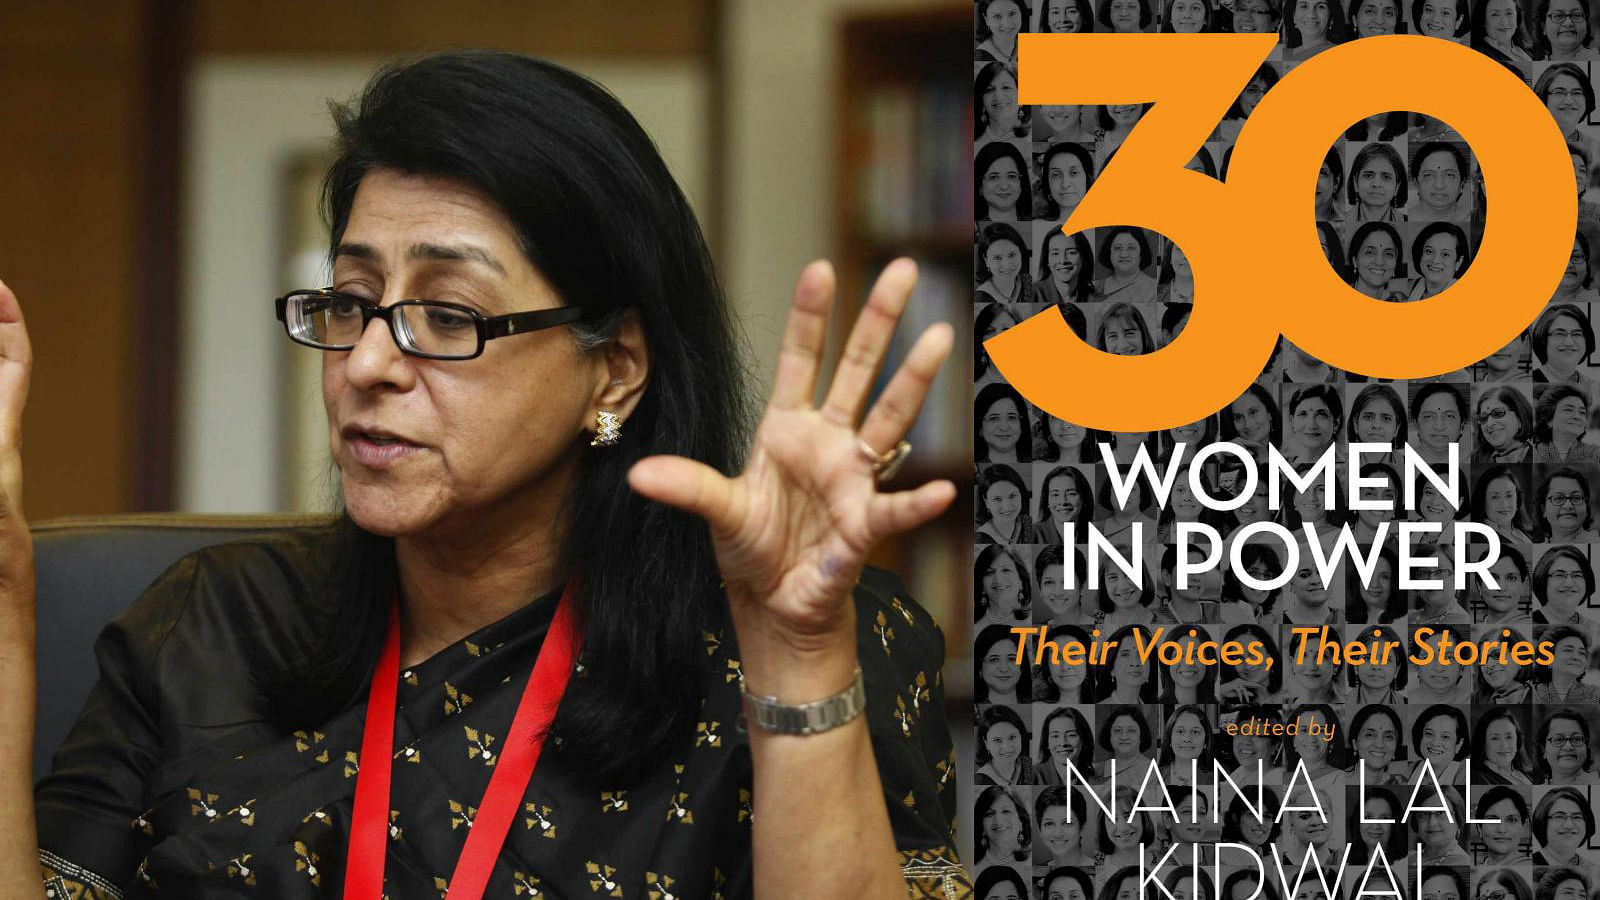 <i>30 Women In Power </i>is edited by Naina Lal Kidwai, Chairperson, HSBC India